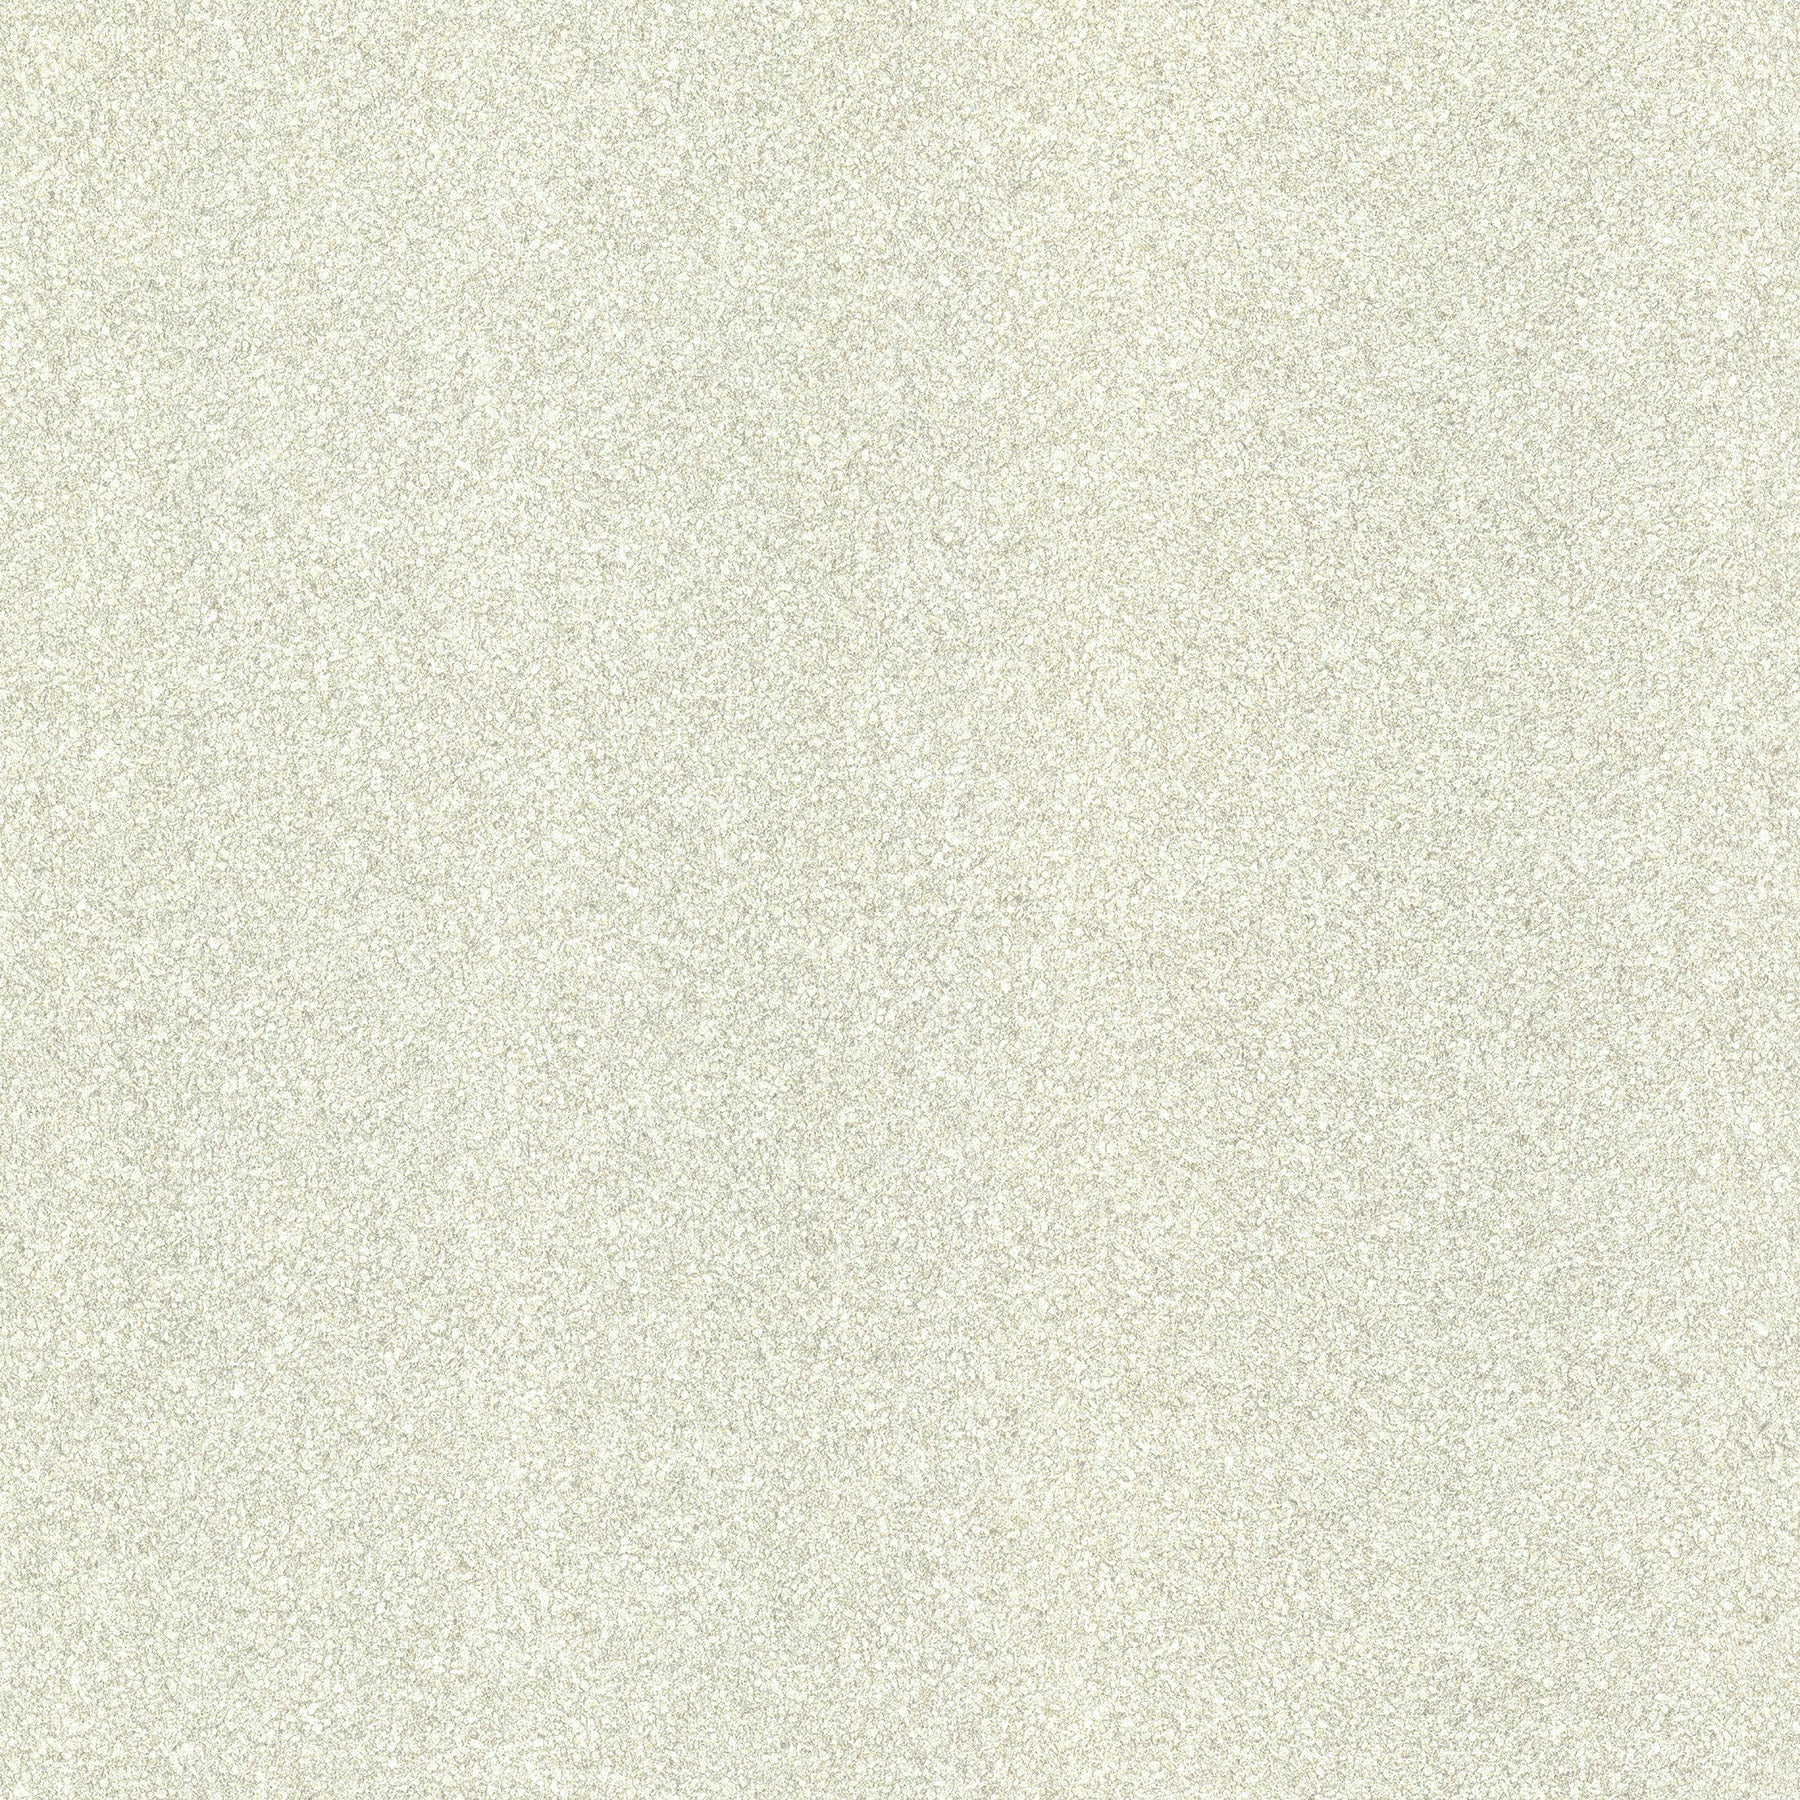 View 2835-606638 Deluxe Whites & Off-Whites Faux Effects Wallpaper by Advantage